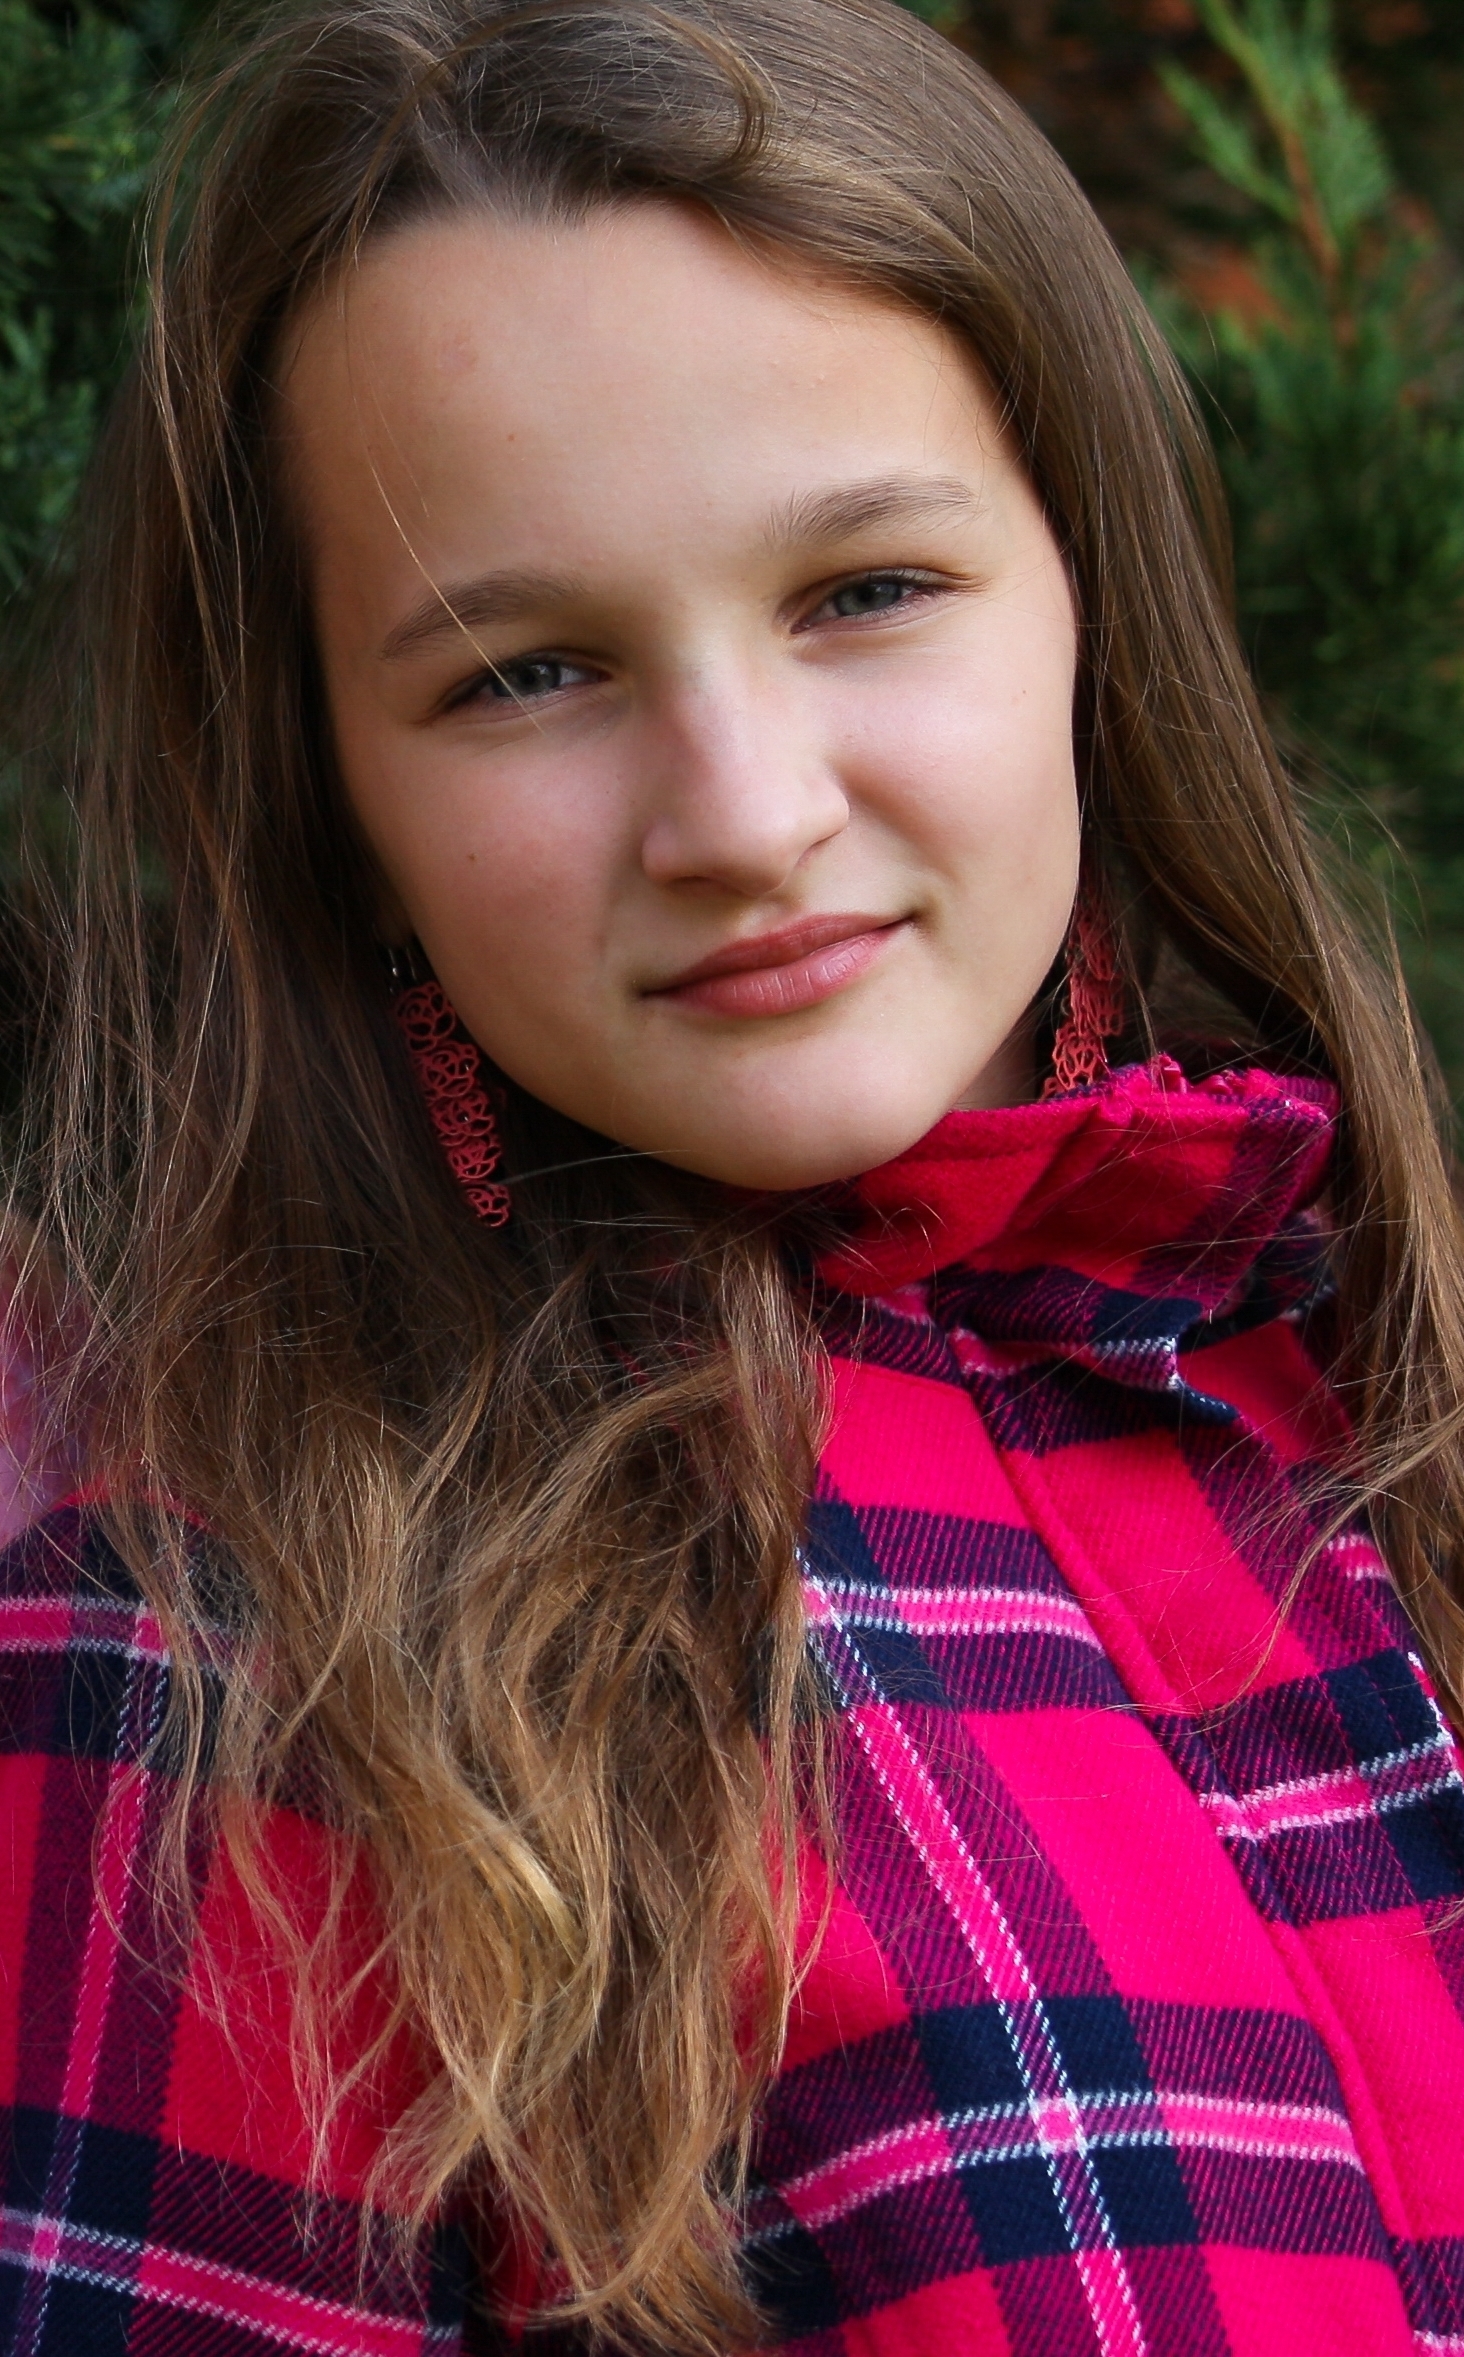 an astonishingly beautiful young Catholic girl photographed in September 2013, picture 13/34